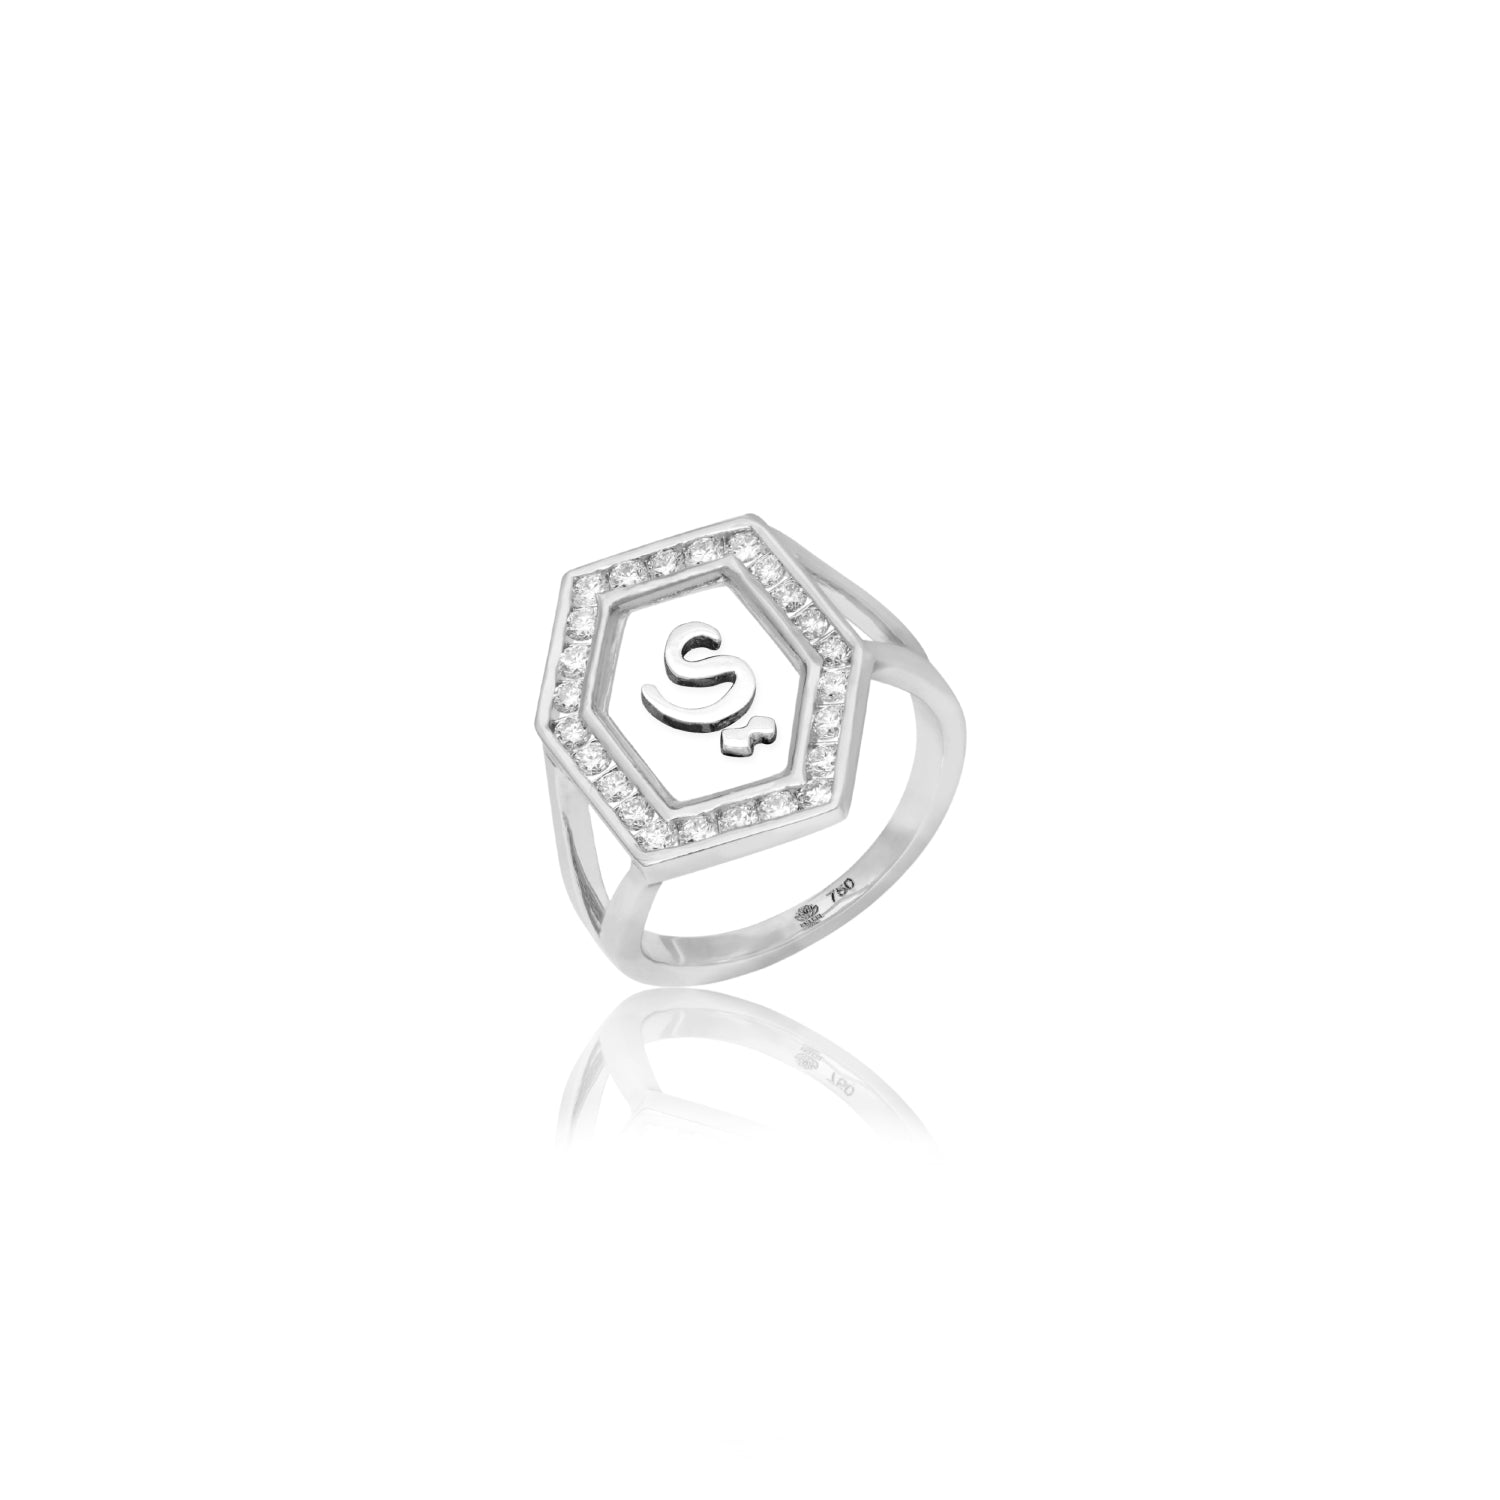 Qamoos 1.0 Letter ي Diamond Ring in White Gold